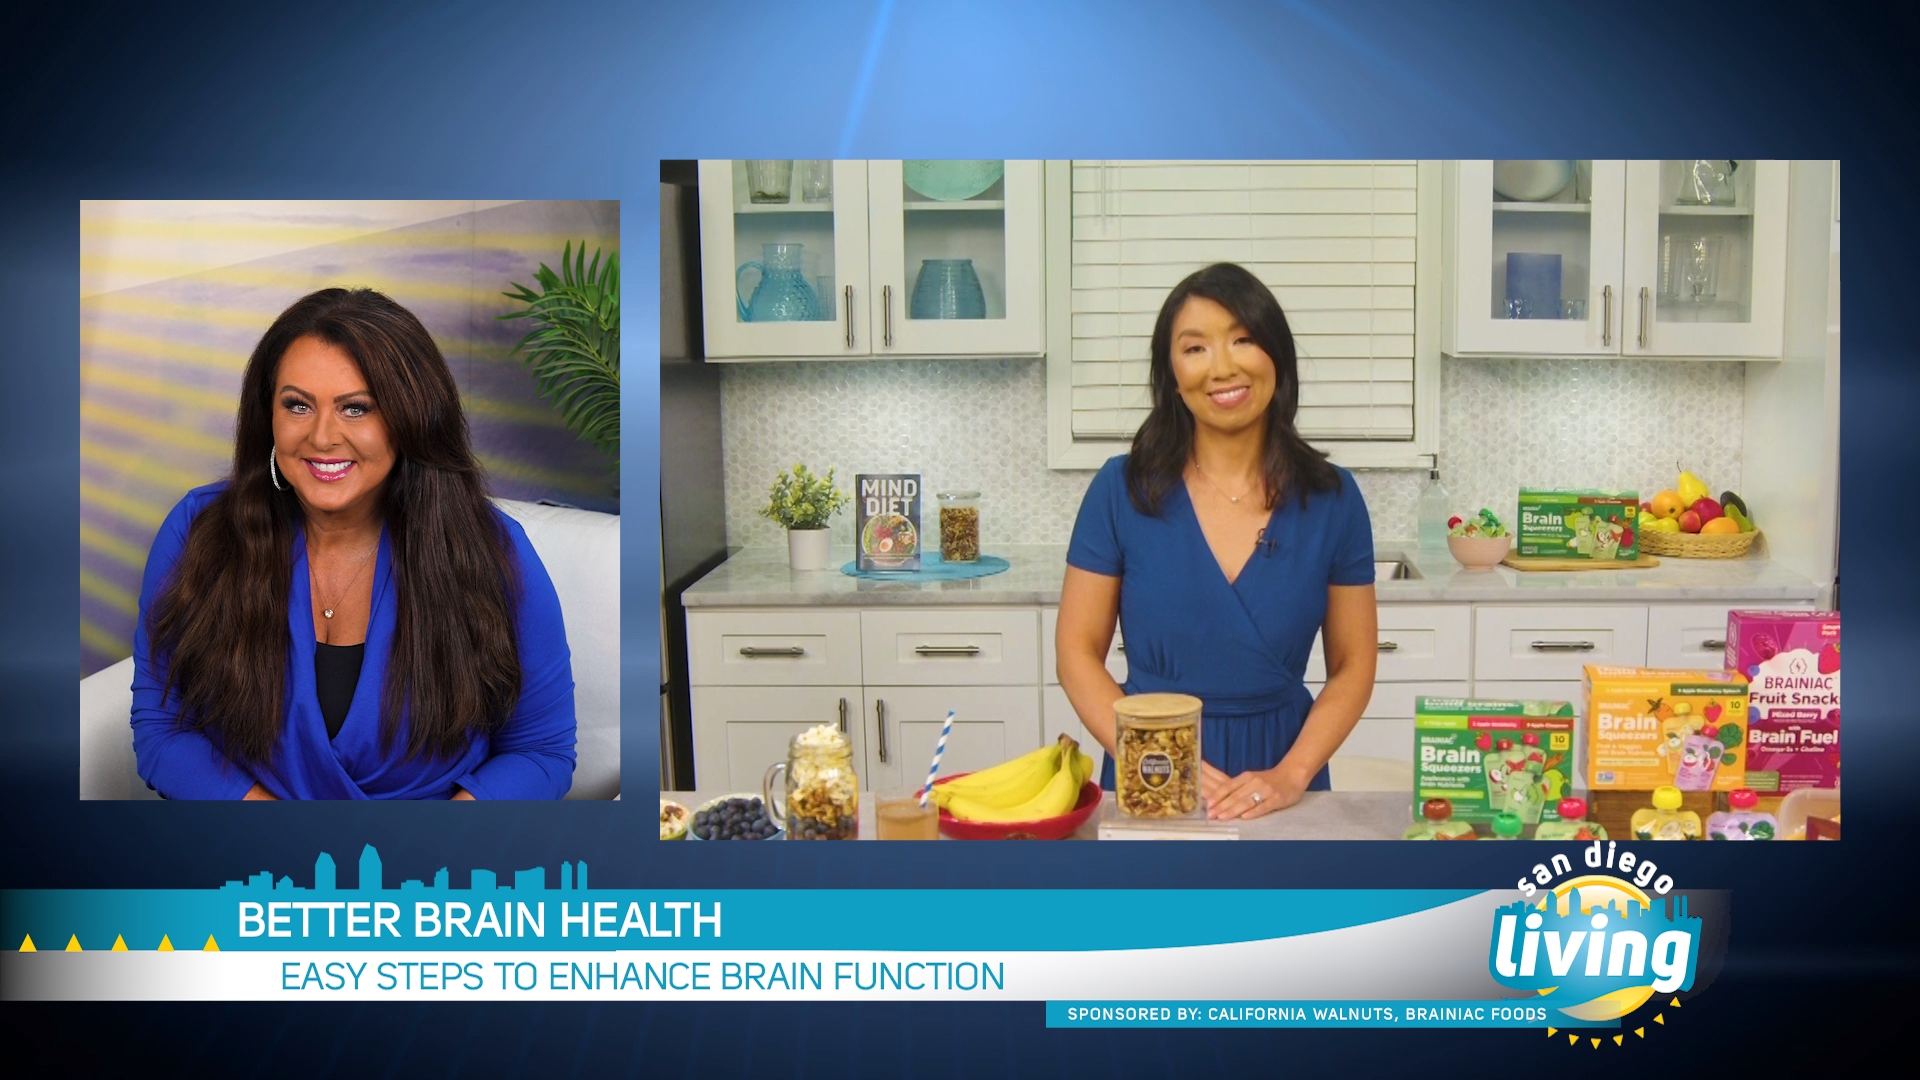 Superfoods & Strategies to Keep Your Mind Sharp as You Age. Sponsored by California Walnuts, Brainiac Foods.